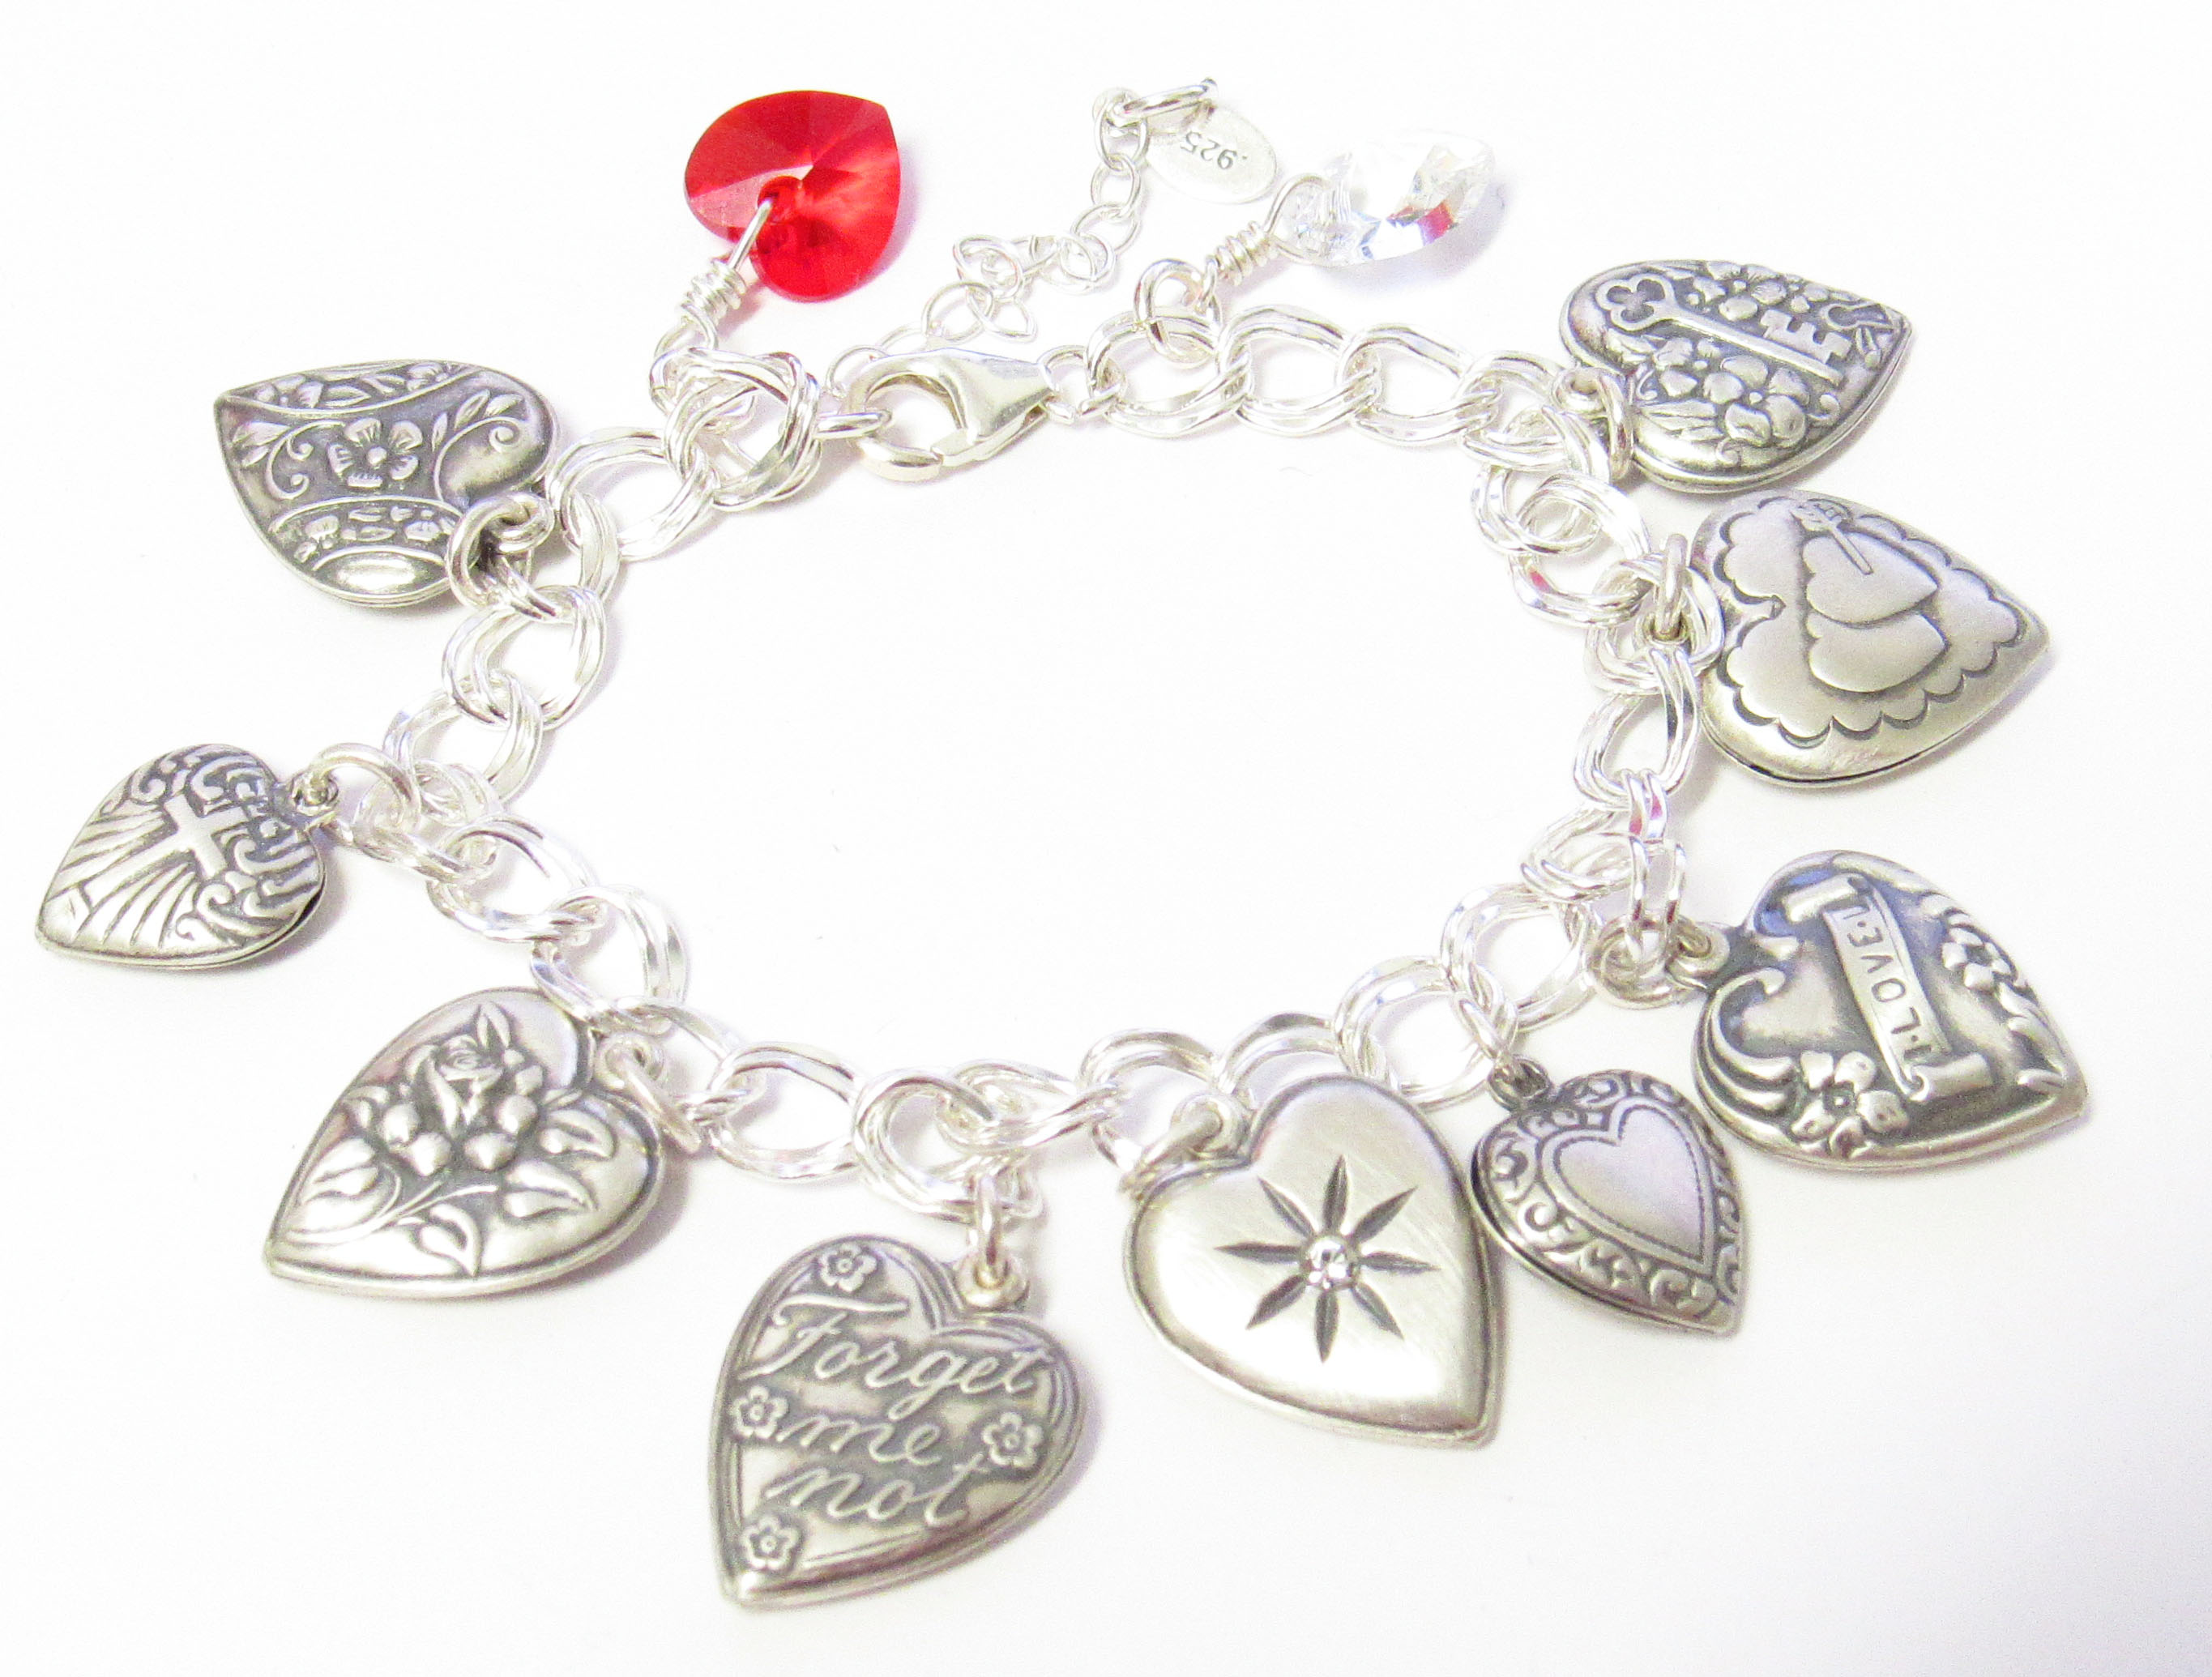 Vintage Puffed/Puffy Heart Charm Bracelet Style 2